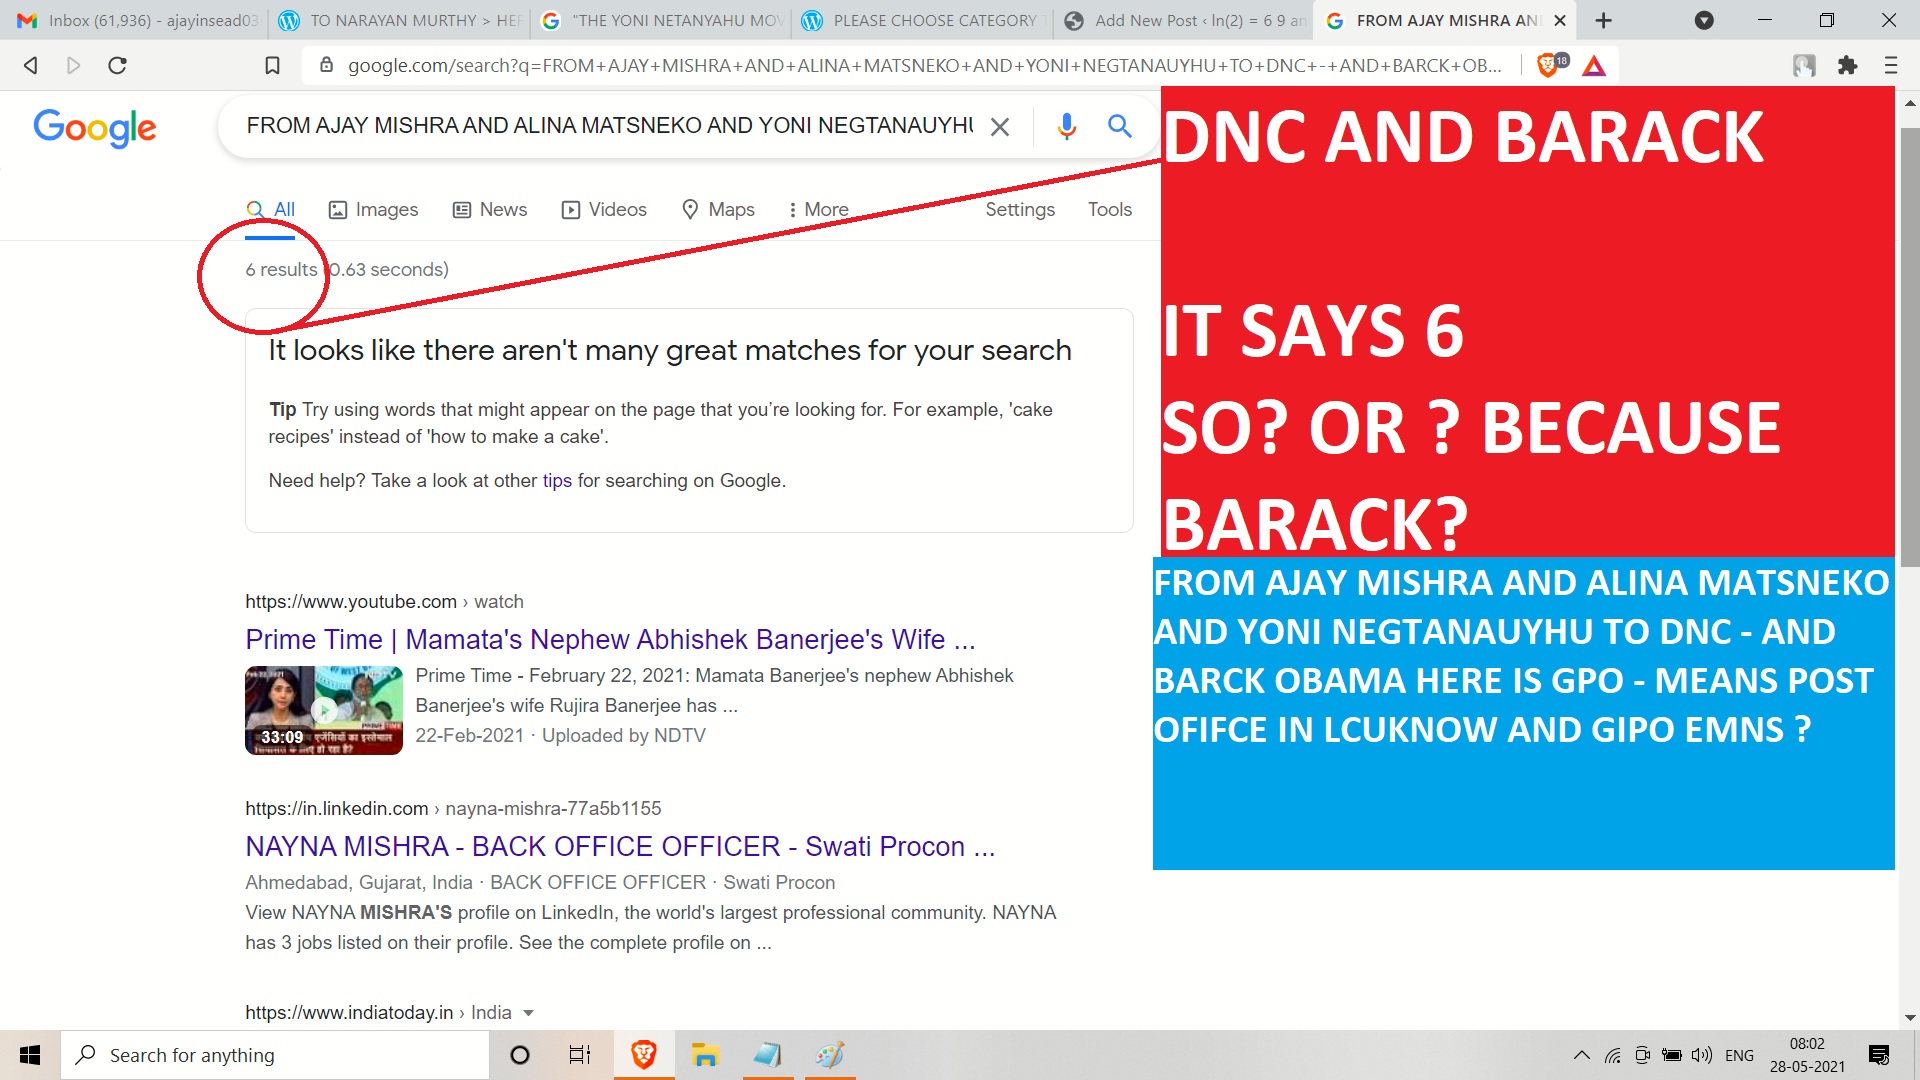 GPO AND GOP - IN USA AND IN LUCNOW FROM AJAY YONI AND ALINA MATSENKO TO BARACK OBAMA DN HIS DNC